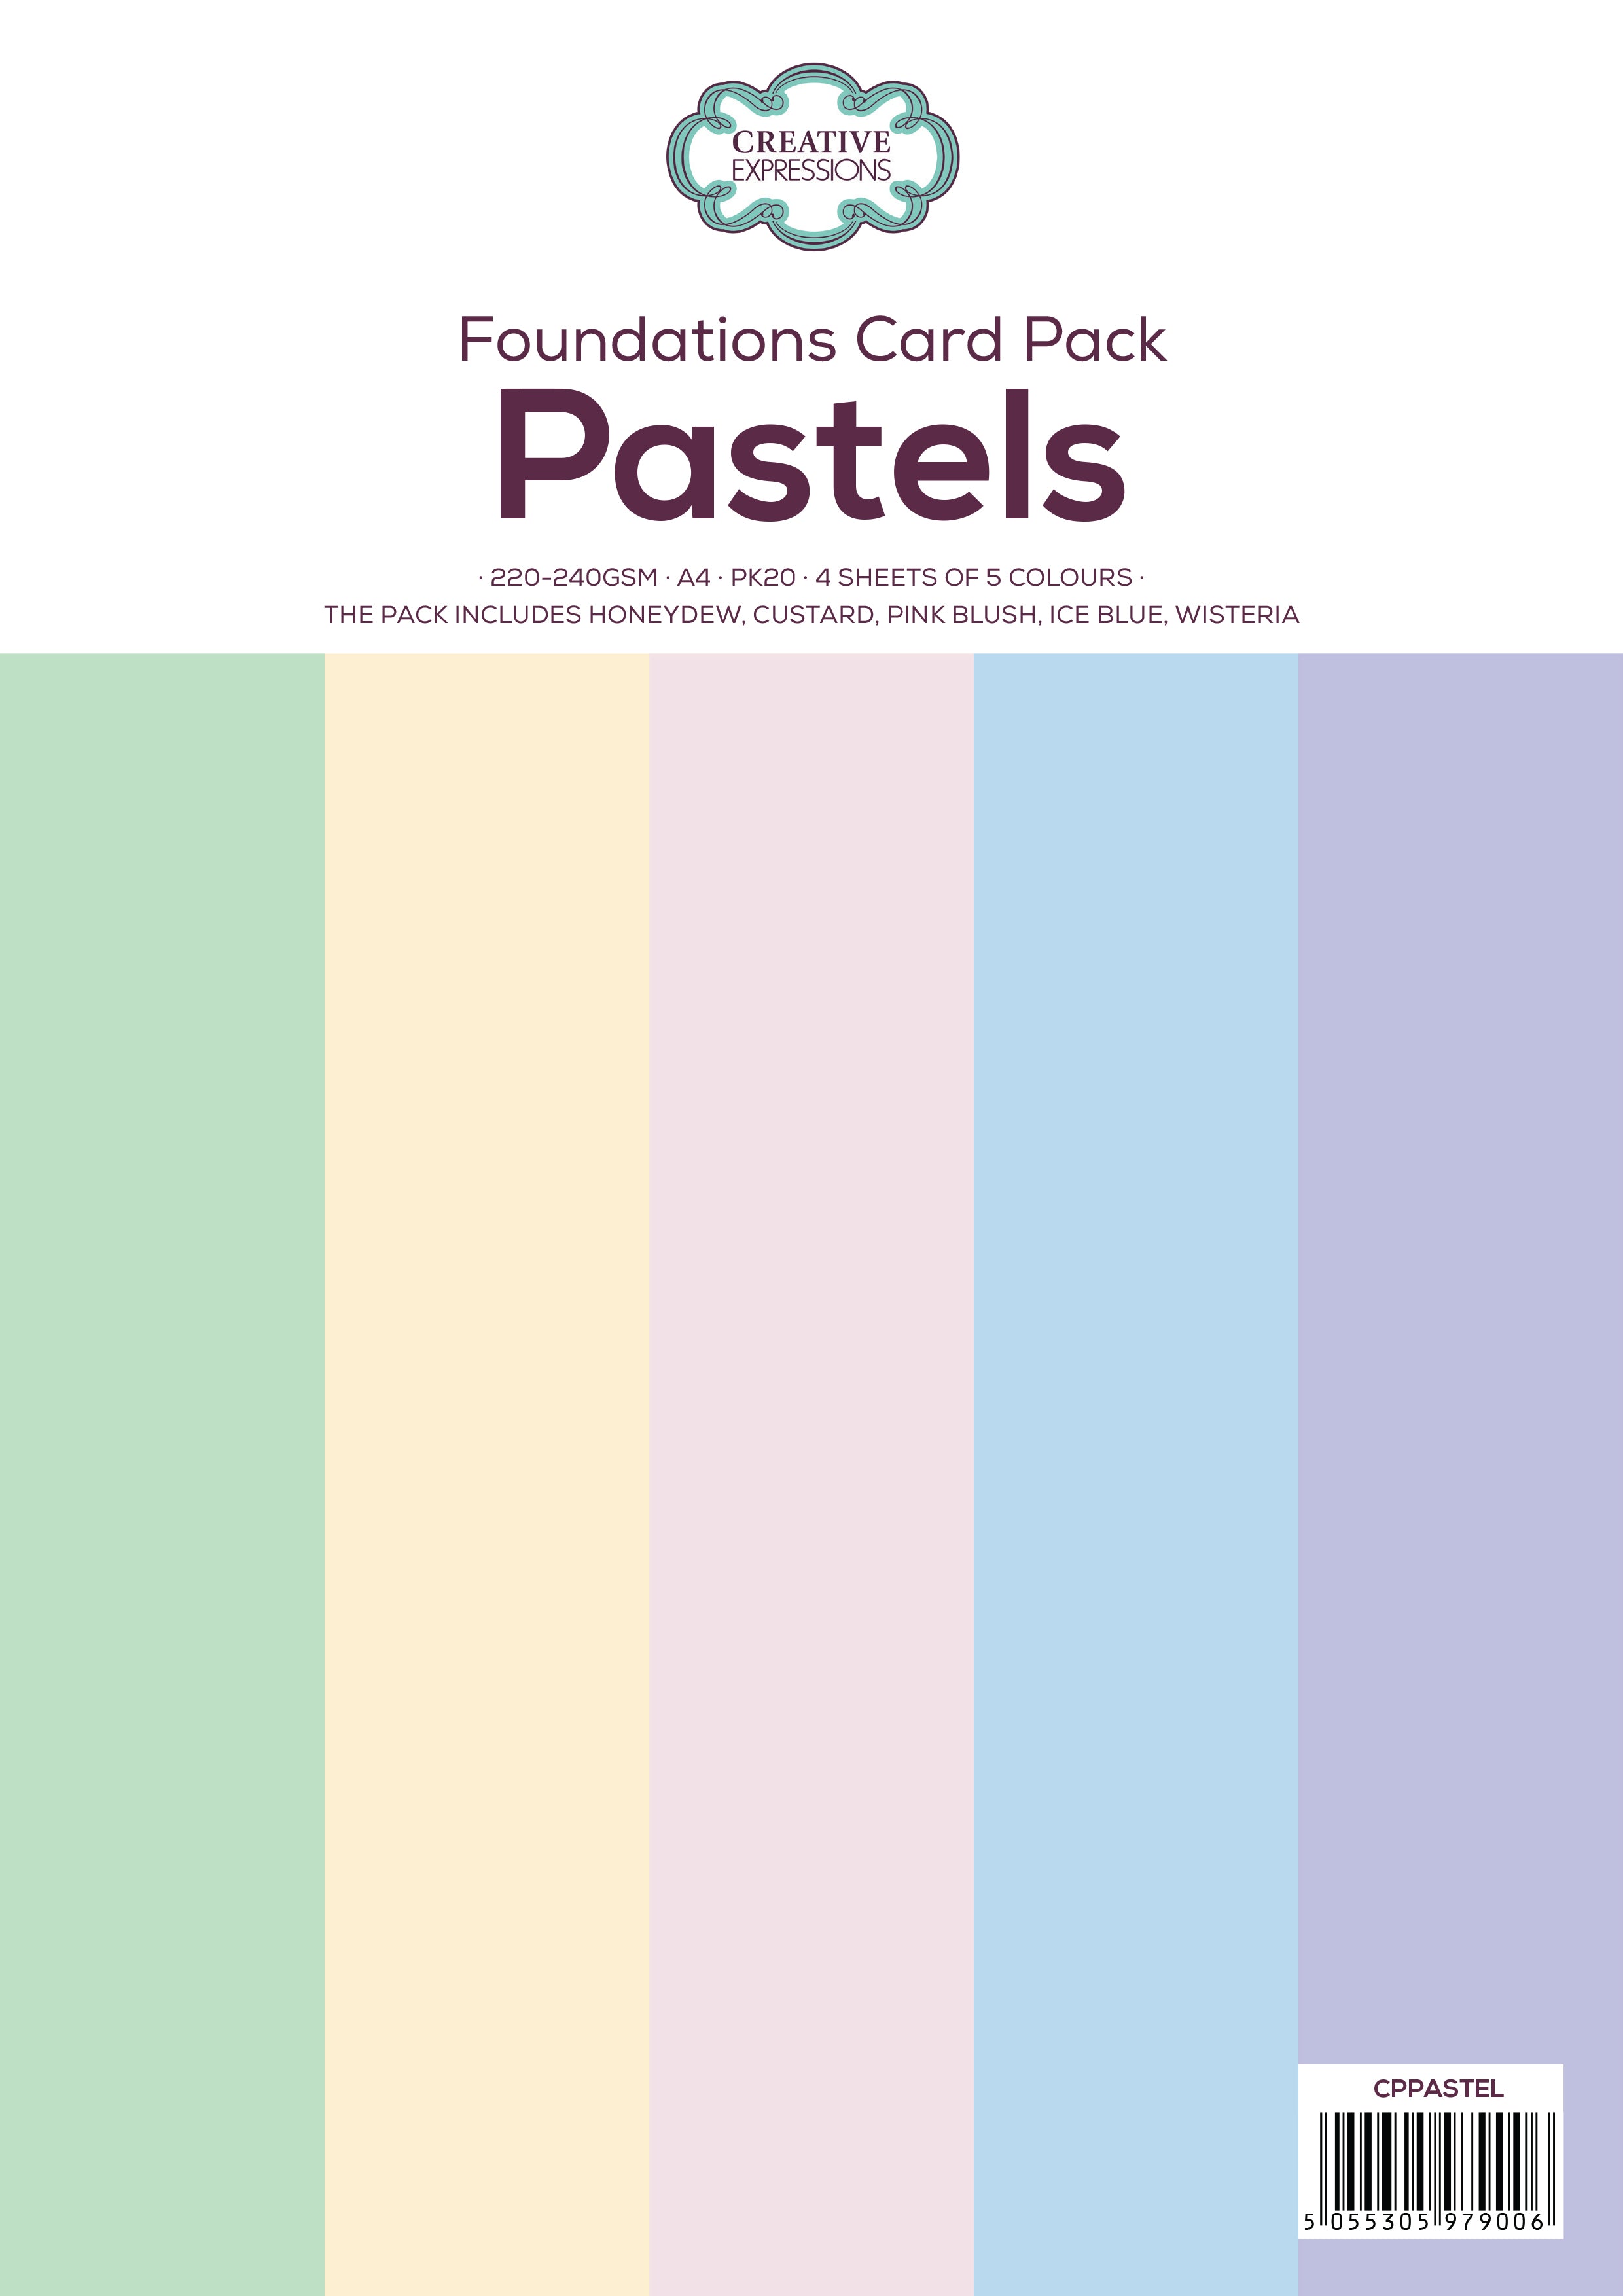 Creative Expressions Pastel Paper Pack 220-240gsm A4 Pk20 4 Sheets of 5 Colours